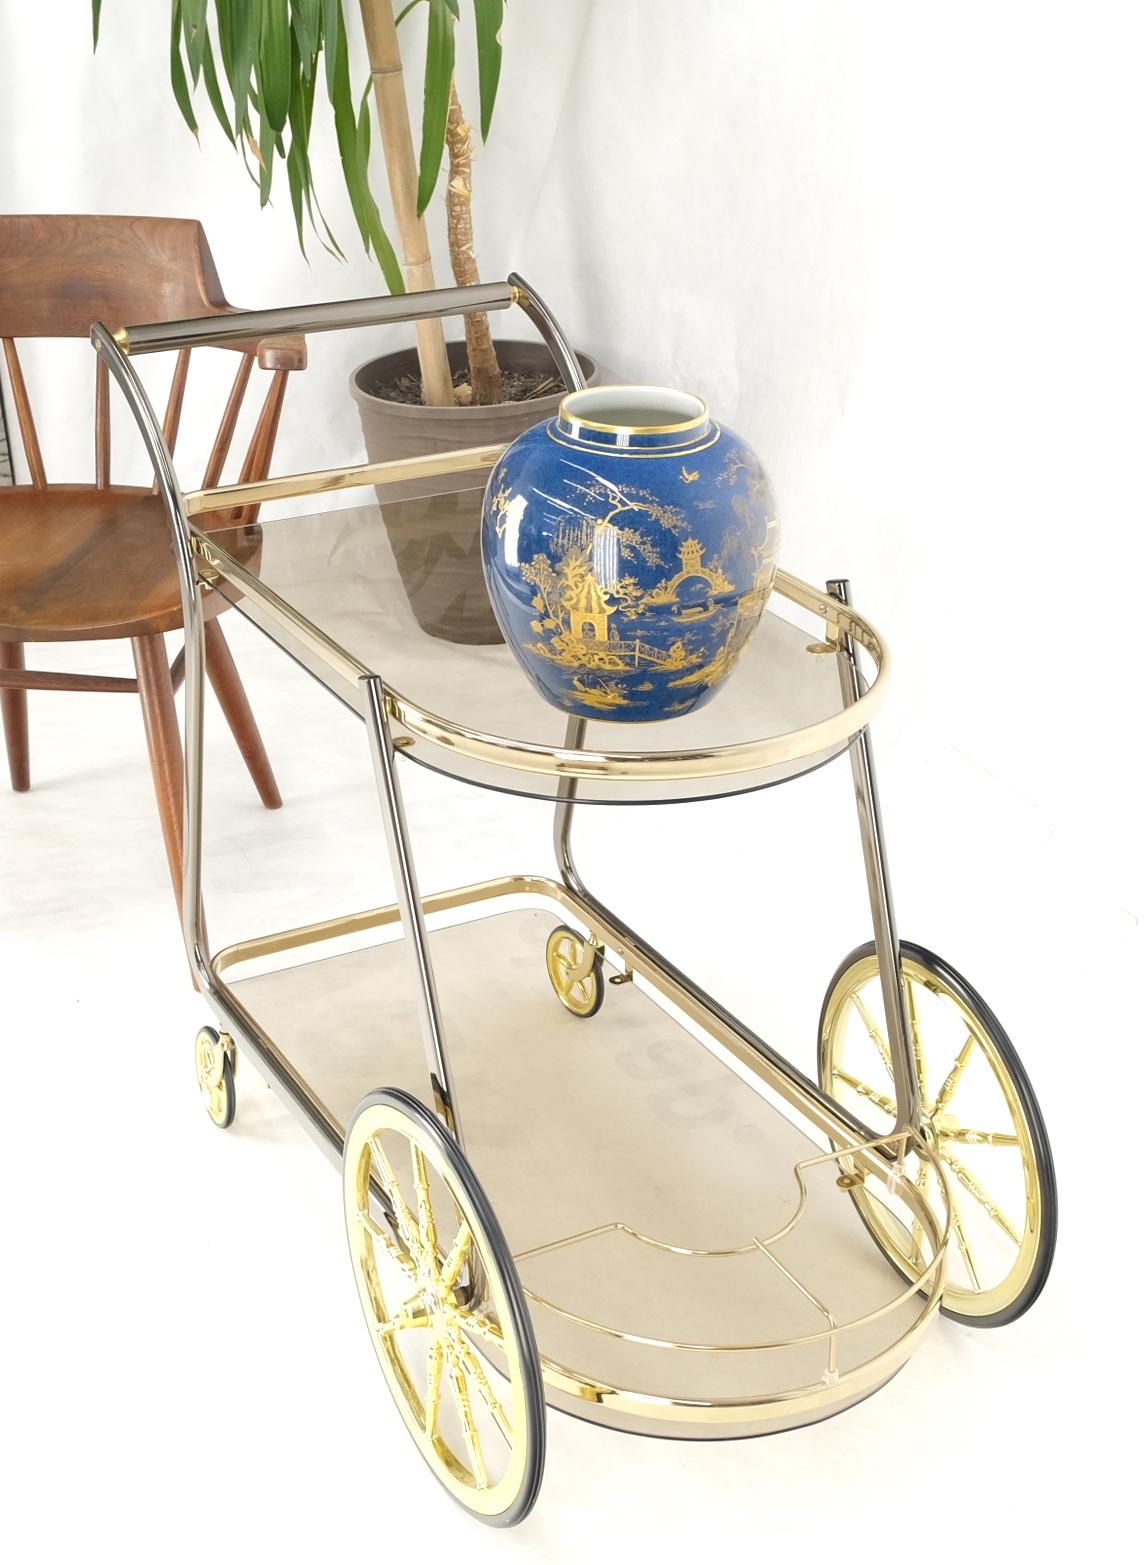 Chrome & brass Mid-Century Modern smoked glass half round shape serving cart bar side table on wheels mint.